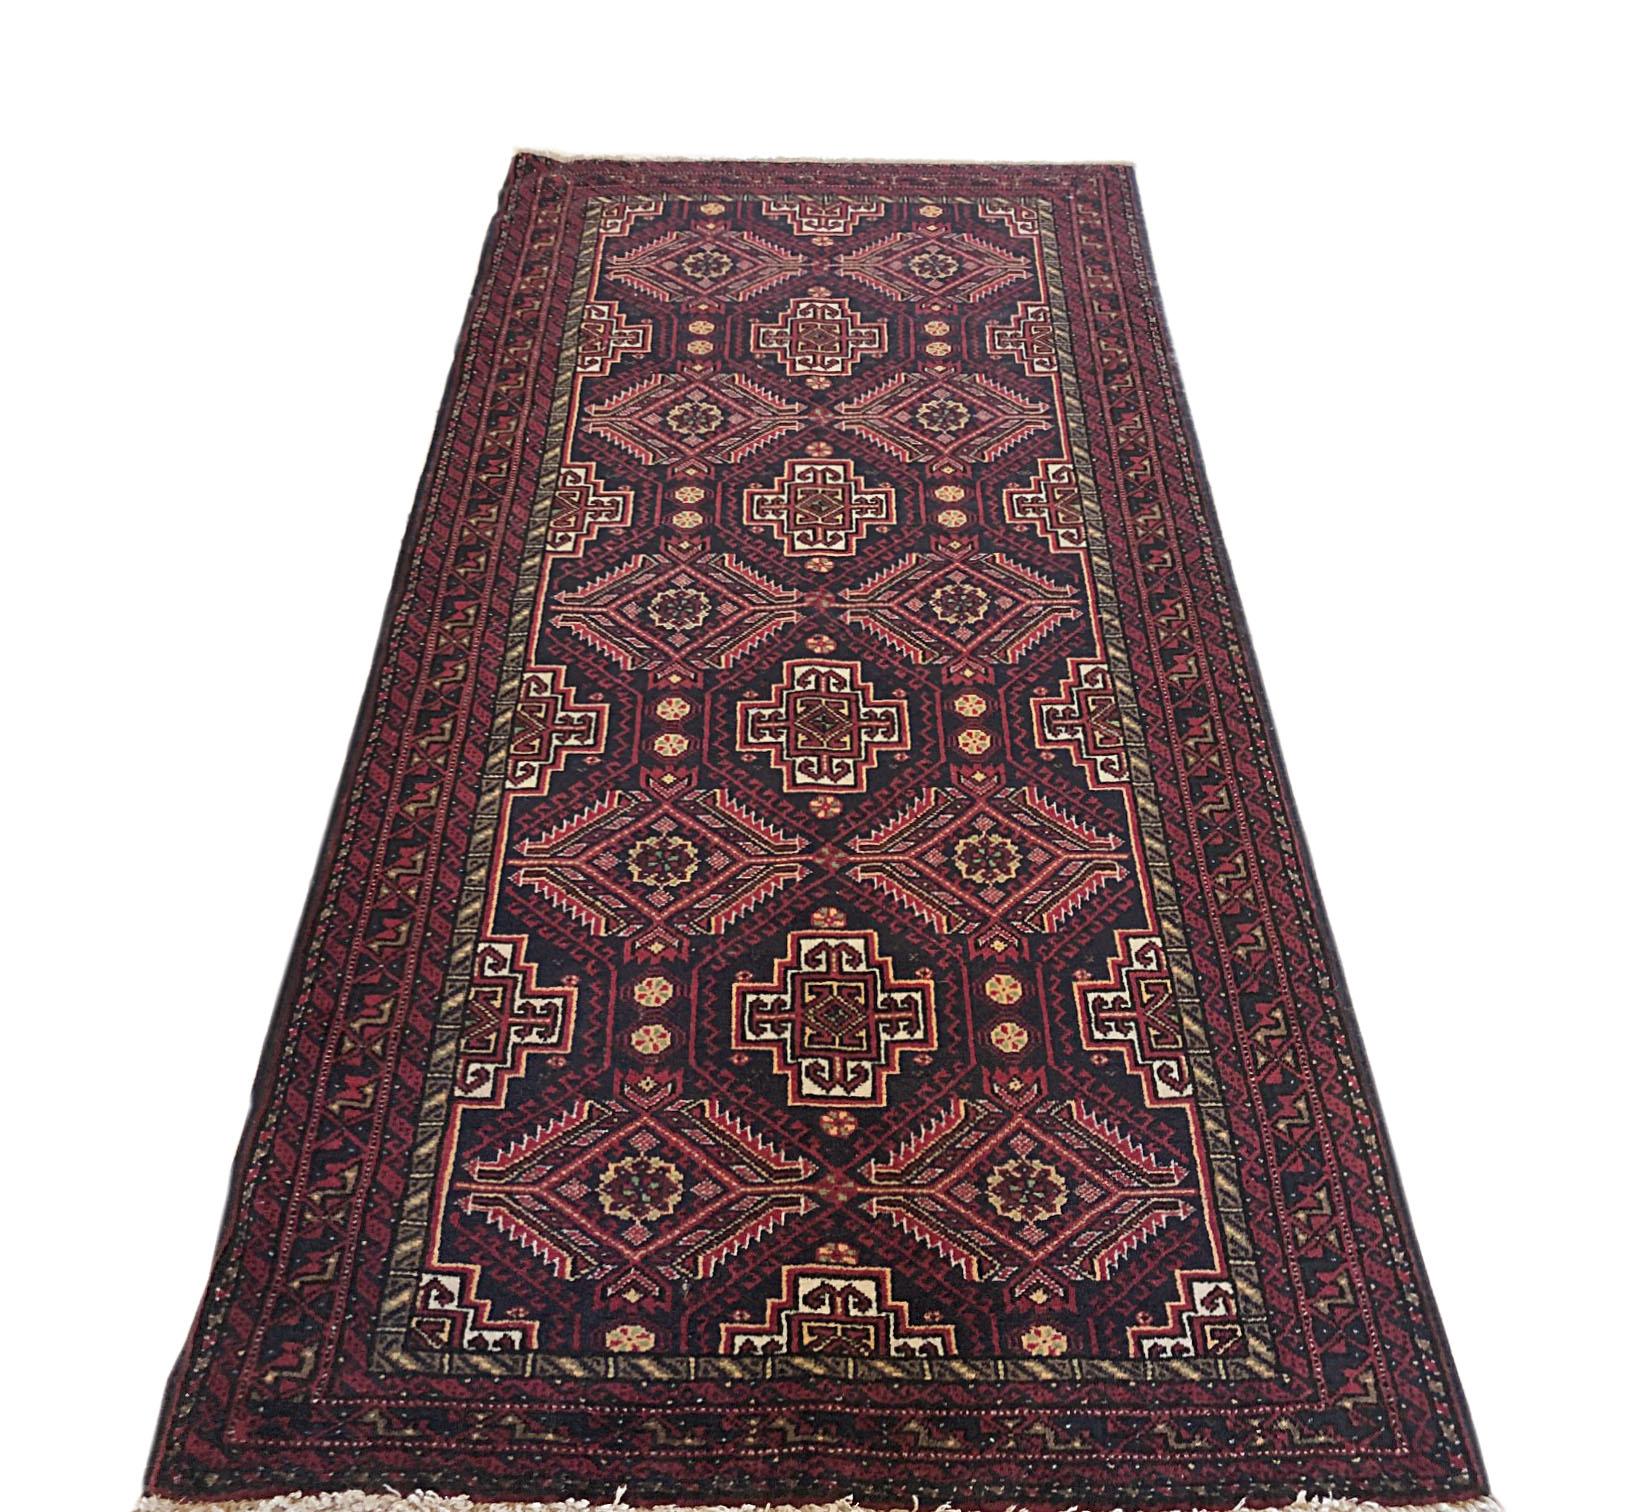 This beautiful Persian Baluchi rug has wool pile with cotton foundation. The size is 2 feet 9 inch by 5 feet 9 inches which can make any environment a bit more warm and cozy and is a perfect for filling up the gap of non-decorated area in your home